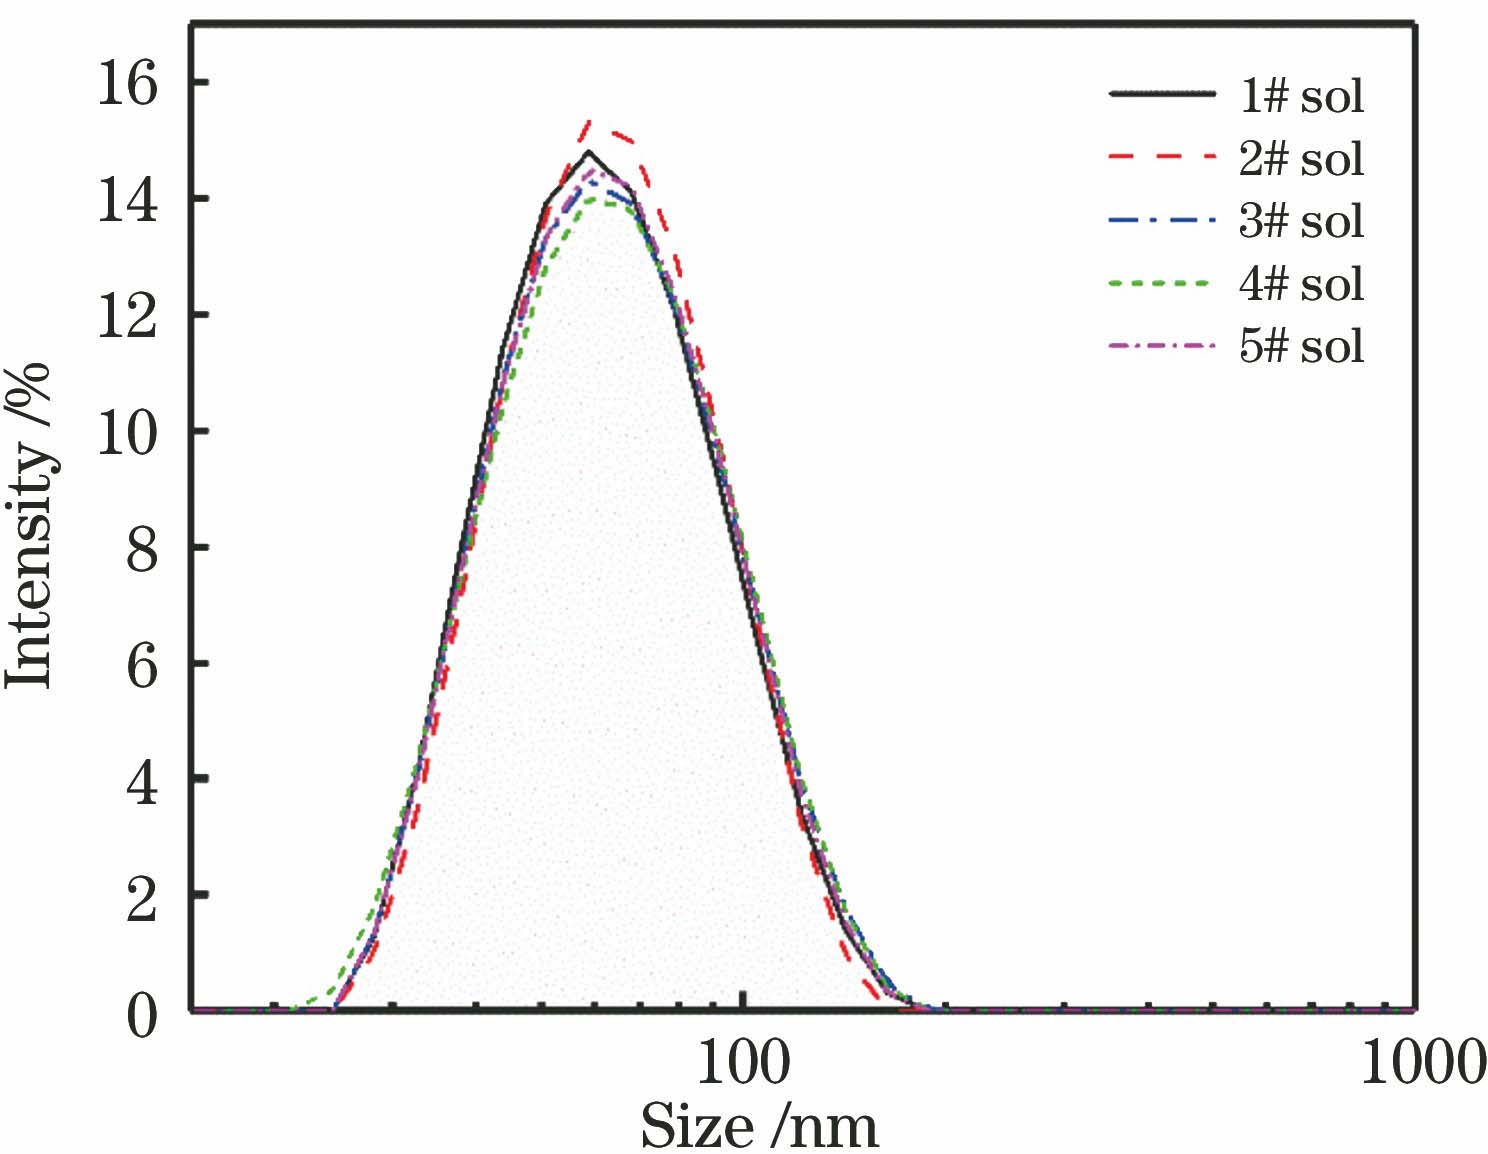 Particle size distributions of SiO2 in sol with different concentrations